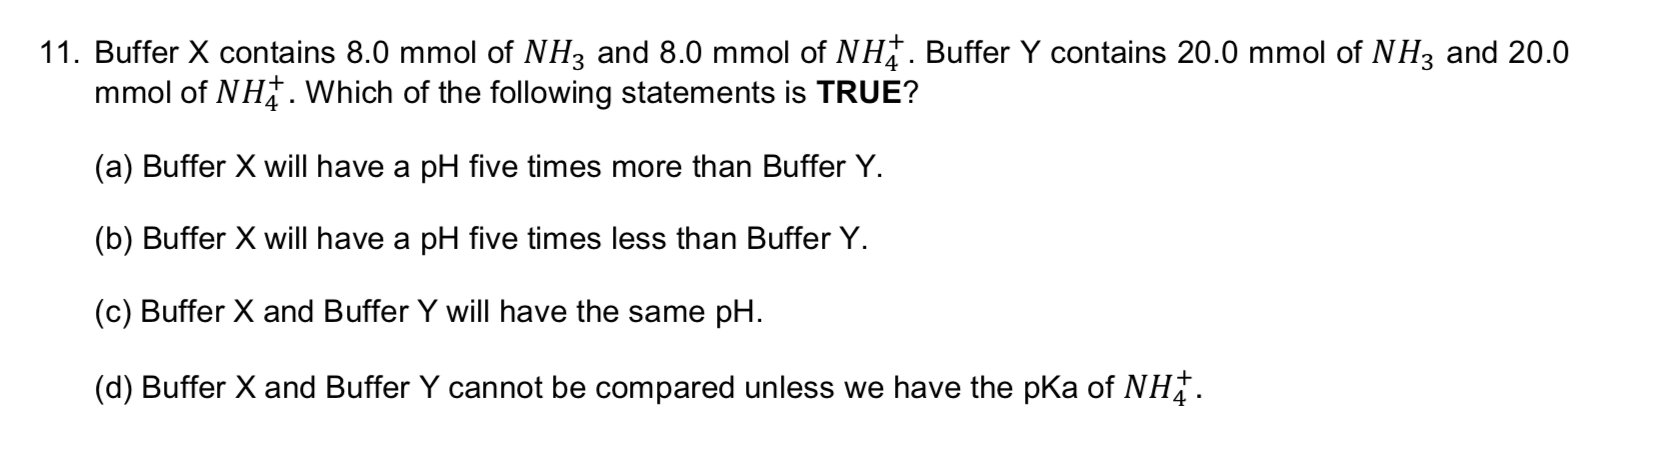 11. Buffer X contains 8.0 mmol of NH3 and 8.0 mmol of NH. Buffer Y contains 20.0 mmol of NH3 and 20.0
mmol of NH. Which of the following statements is TRUE?
(a) Buffer X will have a pH five times more than Buffer Y.
(b) Buffer X will have a pH five times less than Buffer Y
(c) Buffer X and Buffer Y will have the same pH
(d) Buffer X and Buffer Y cannot be compared unless we have the pKa of NH
